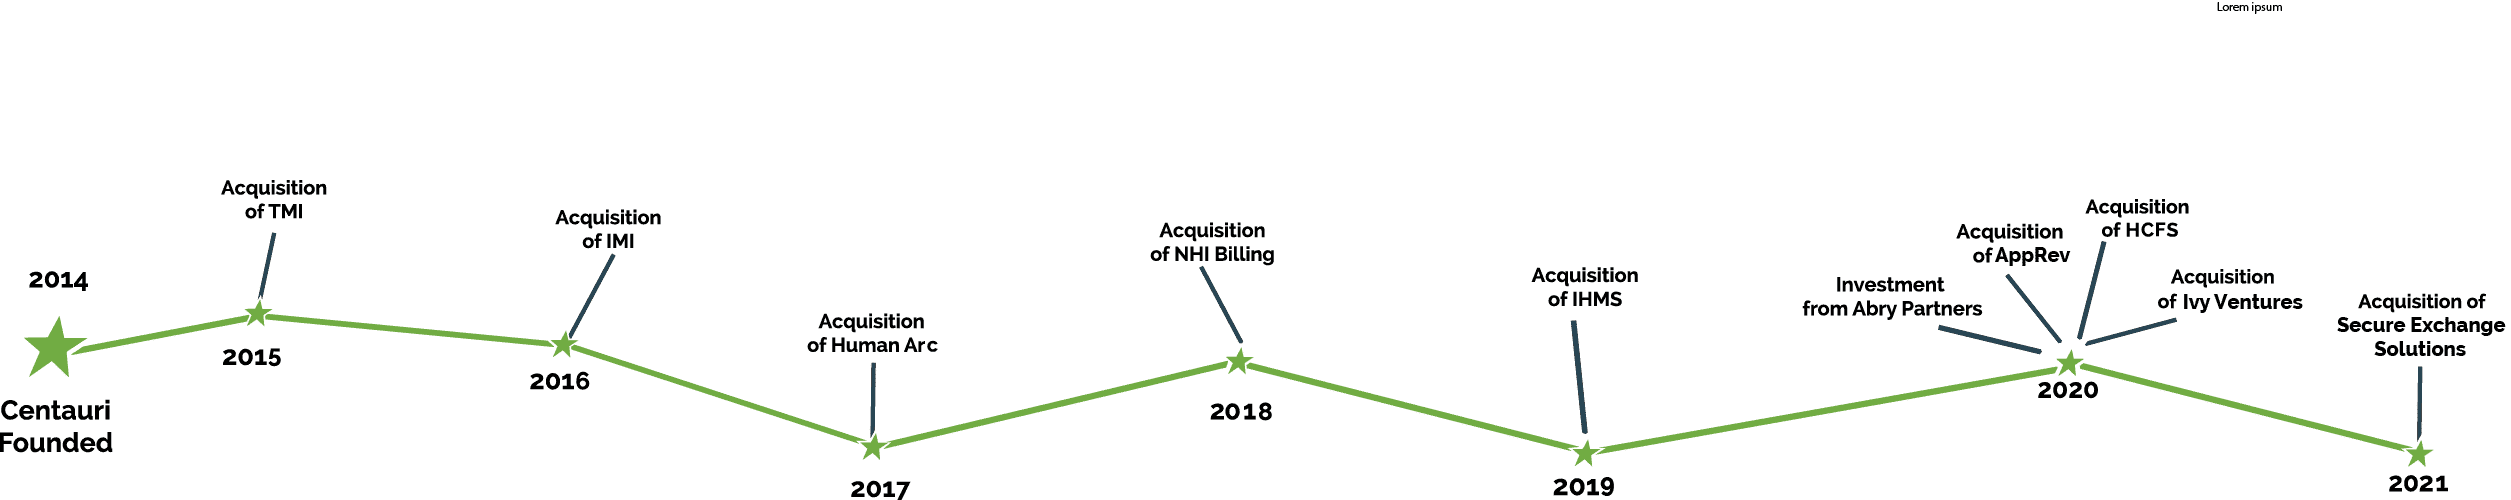 2014 Centauri Founded. Acquisition of TMI 2015. Acquisition of IMI 2016. Acquisition of Human Arc 2017. Acquisition of NHI Billing 2018. Acquisition of IHMS 2019. Investment from Abry Partners, Acquisition of AppRev, Acquisition of HCFS, Acquisition of Ivy Ventures 2020.